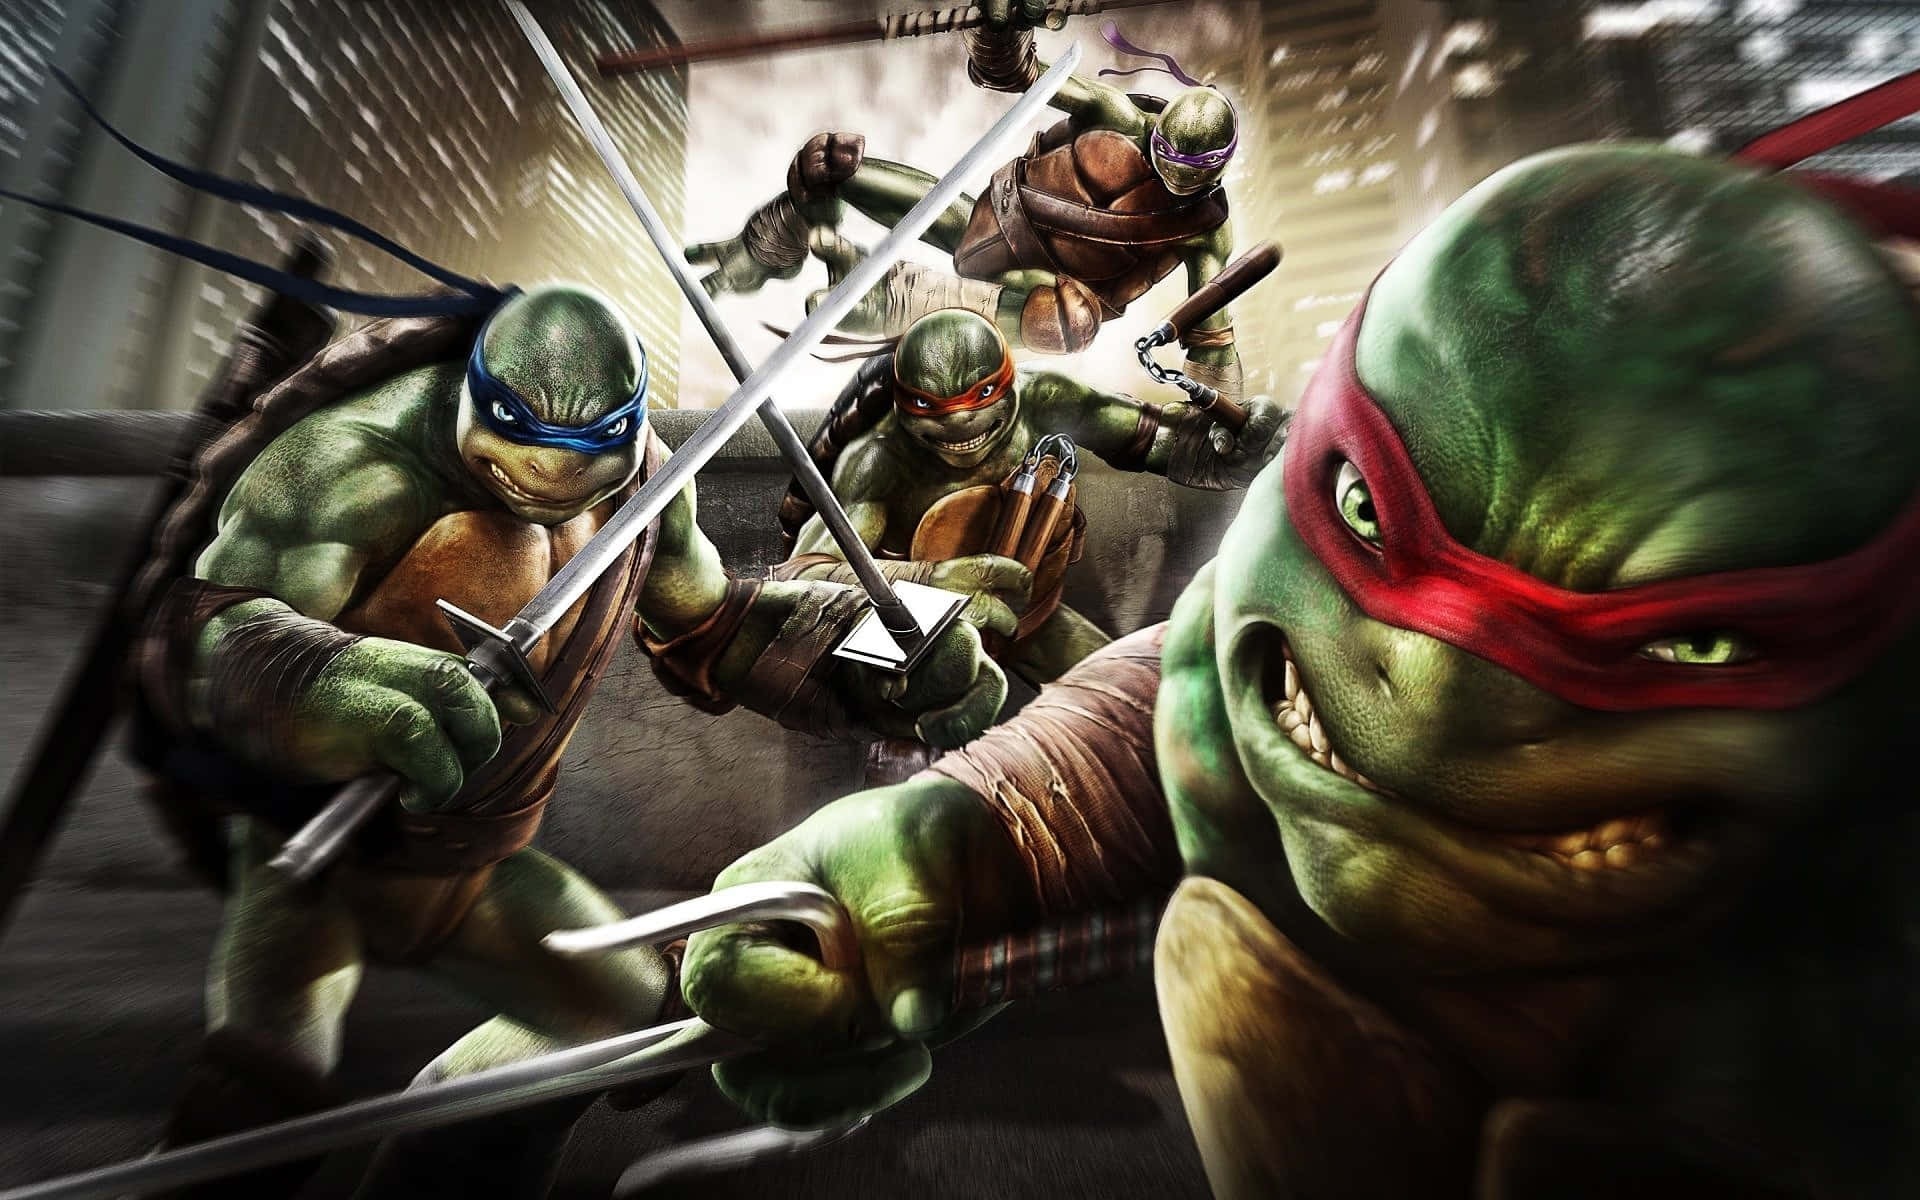 The four Ninja Turtles ready to fight evil